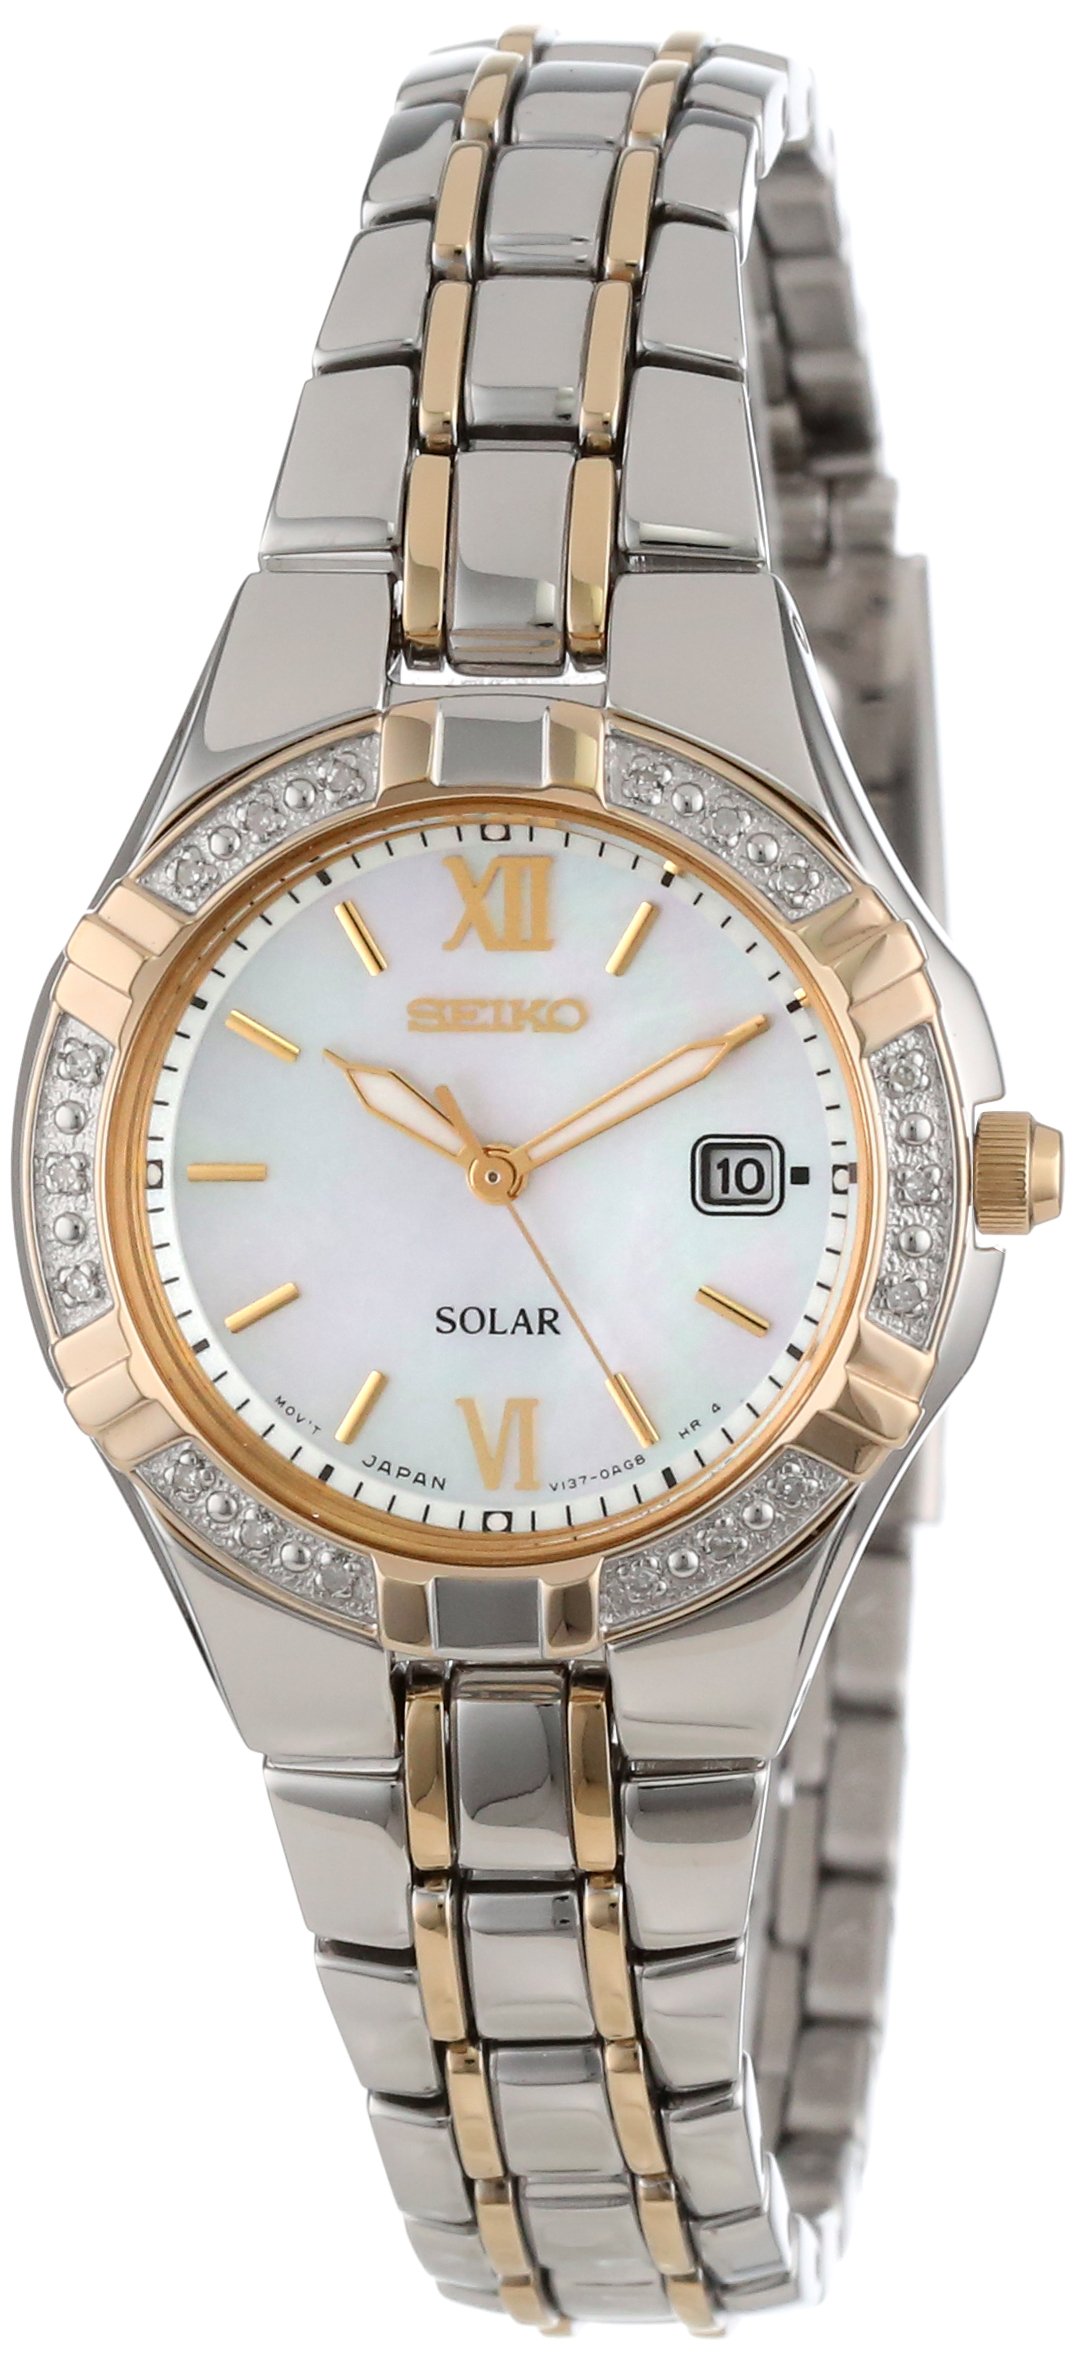 SEIKO Women's SUT068 Dress Solar Classic Diamond-Accented Two-Tone Stainless Steel Watch, Mother of Pearl Dial